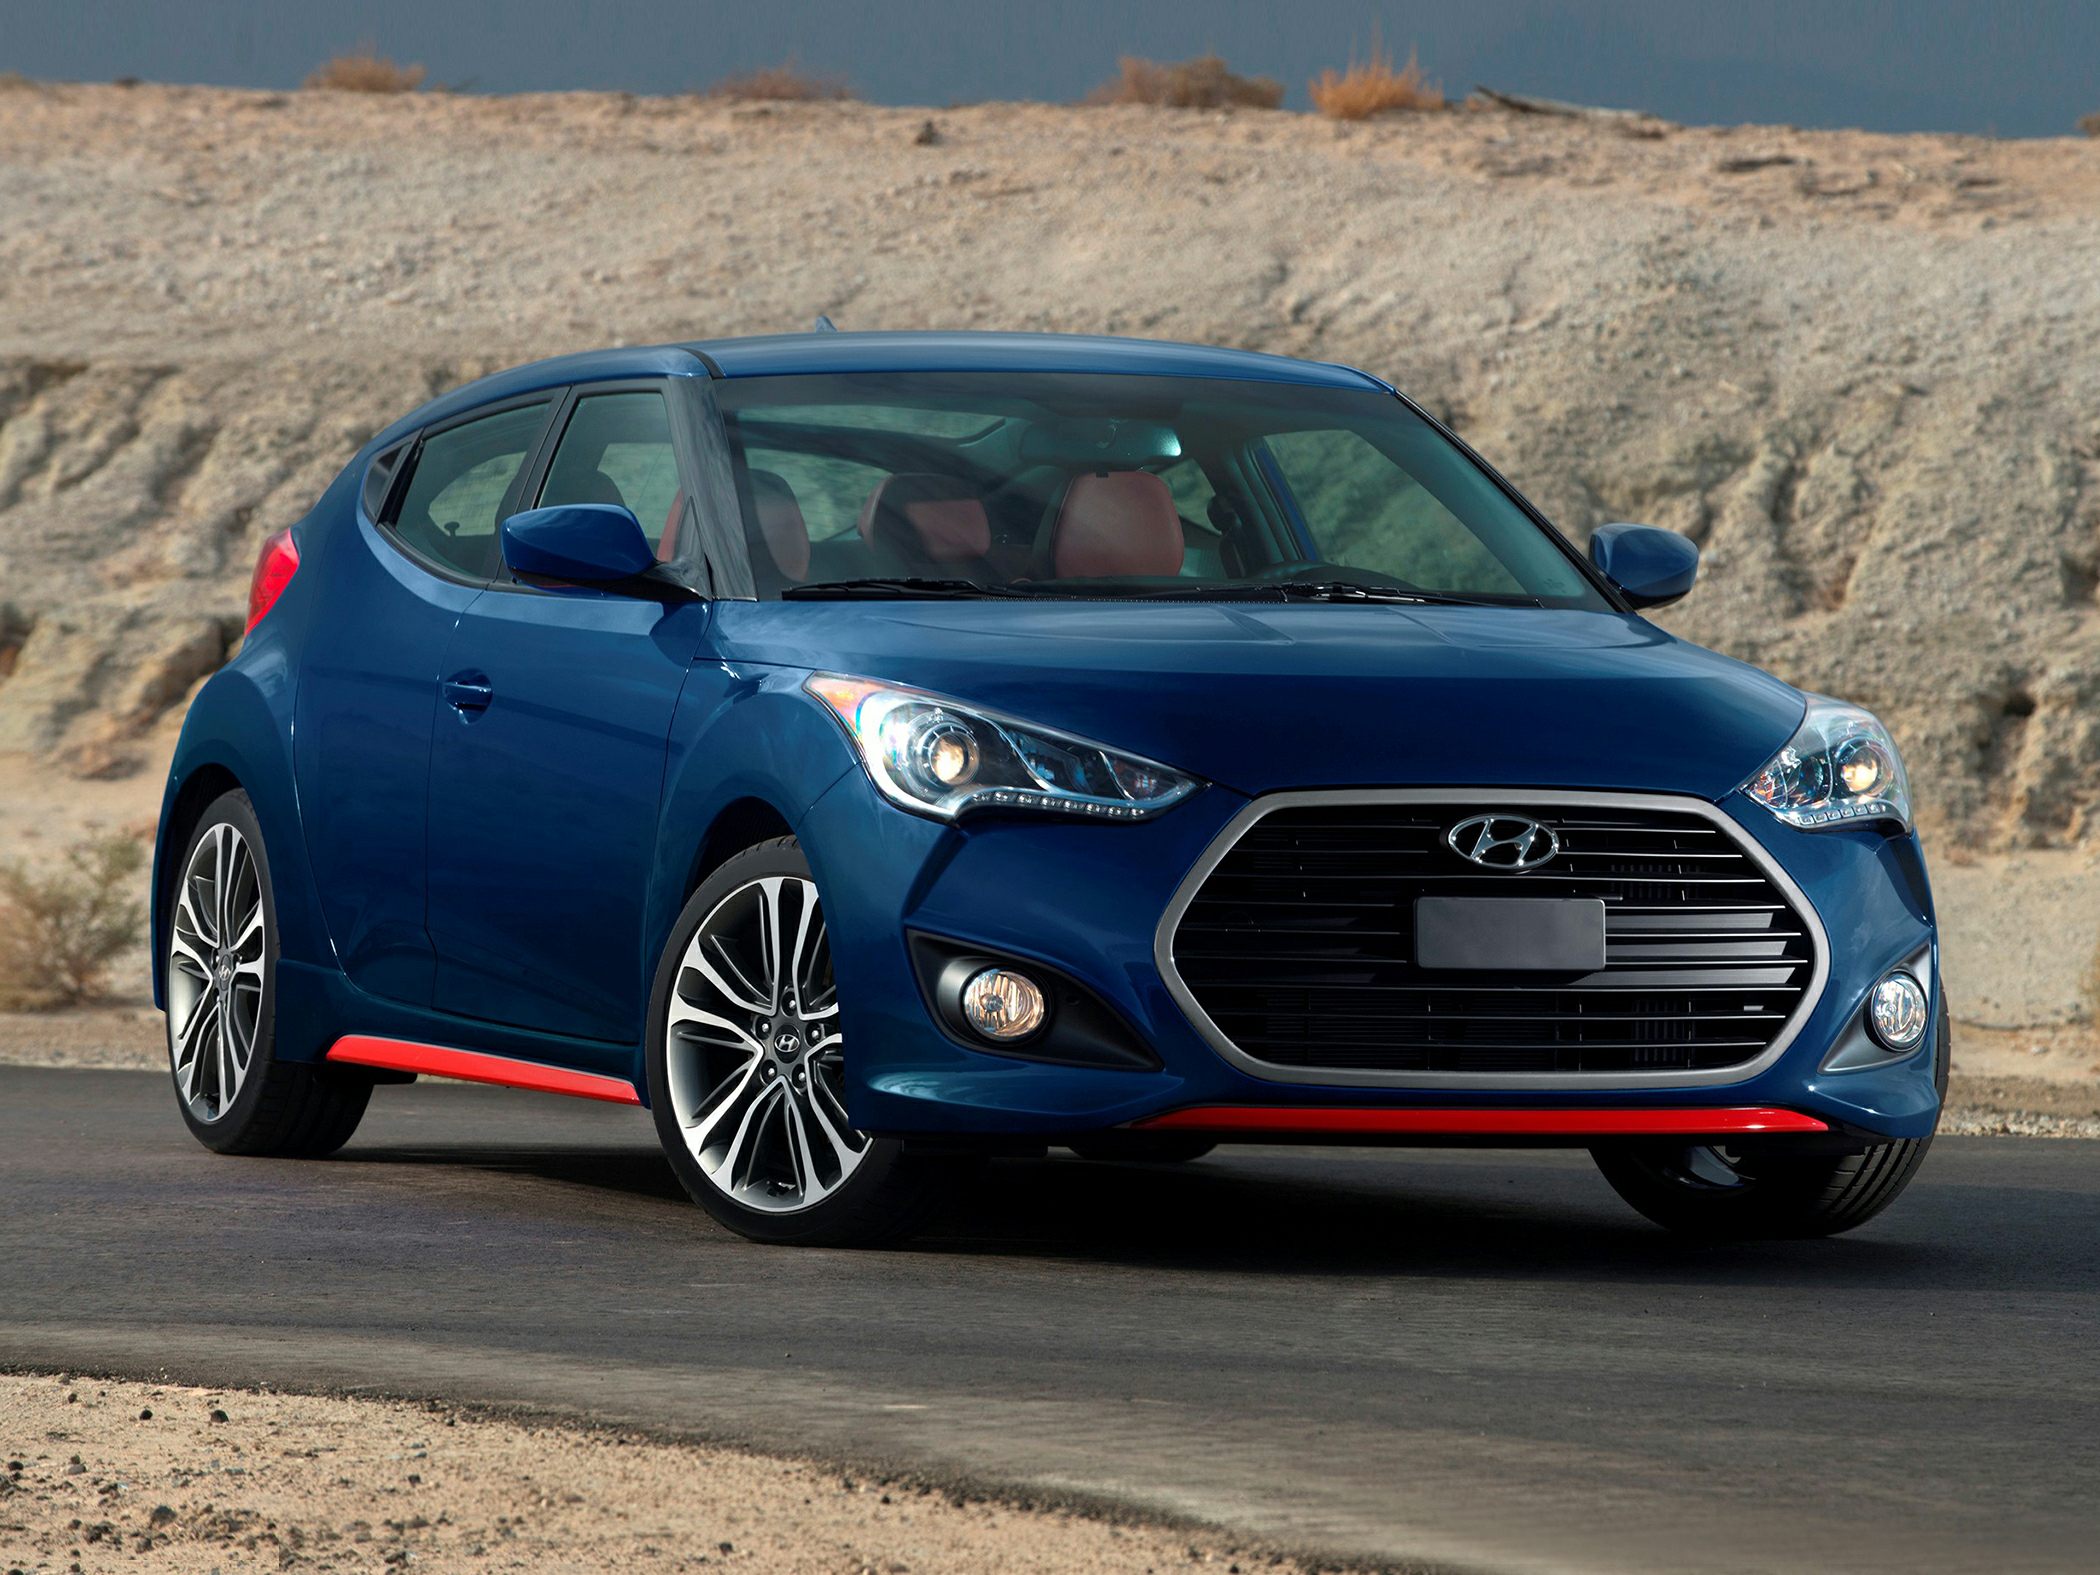 Hyundai Veloster Turbo Front Or Rear Wheel Drive - carsreviwes